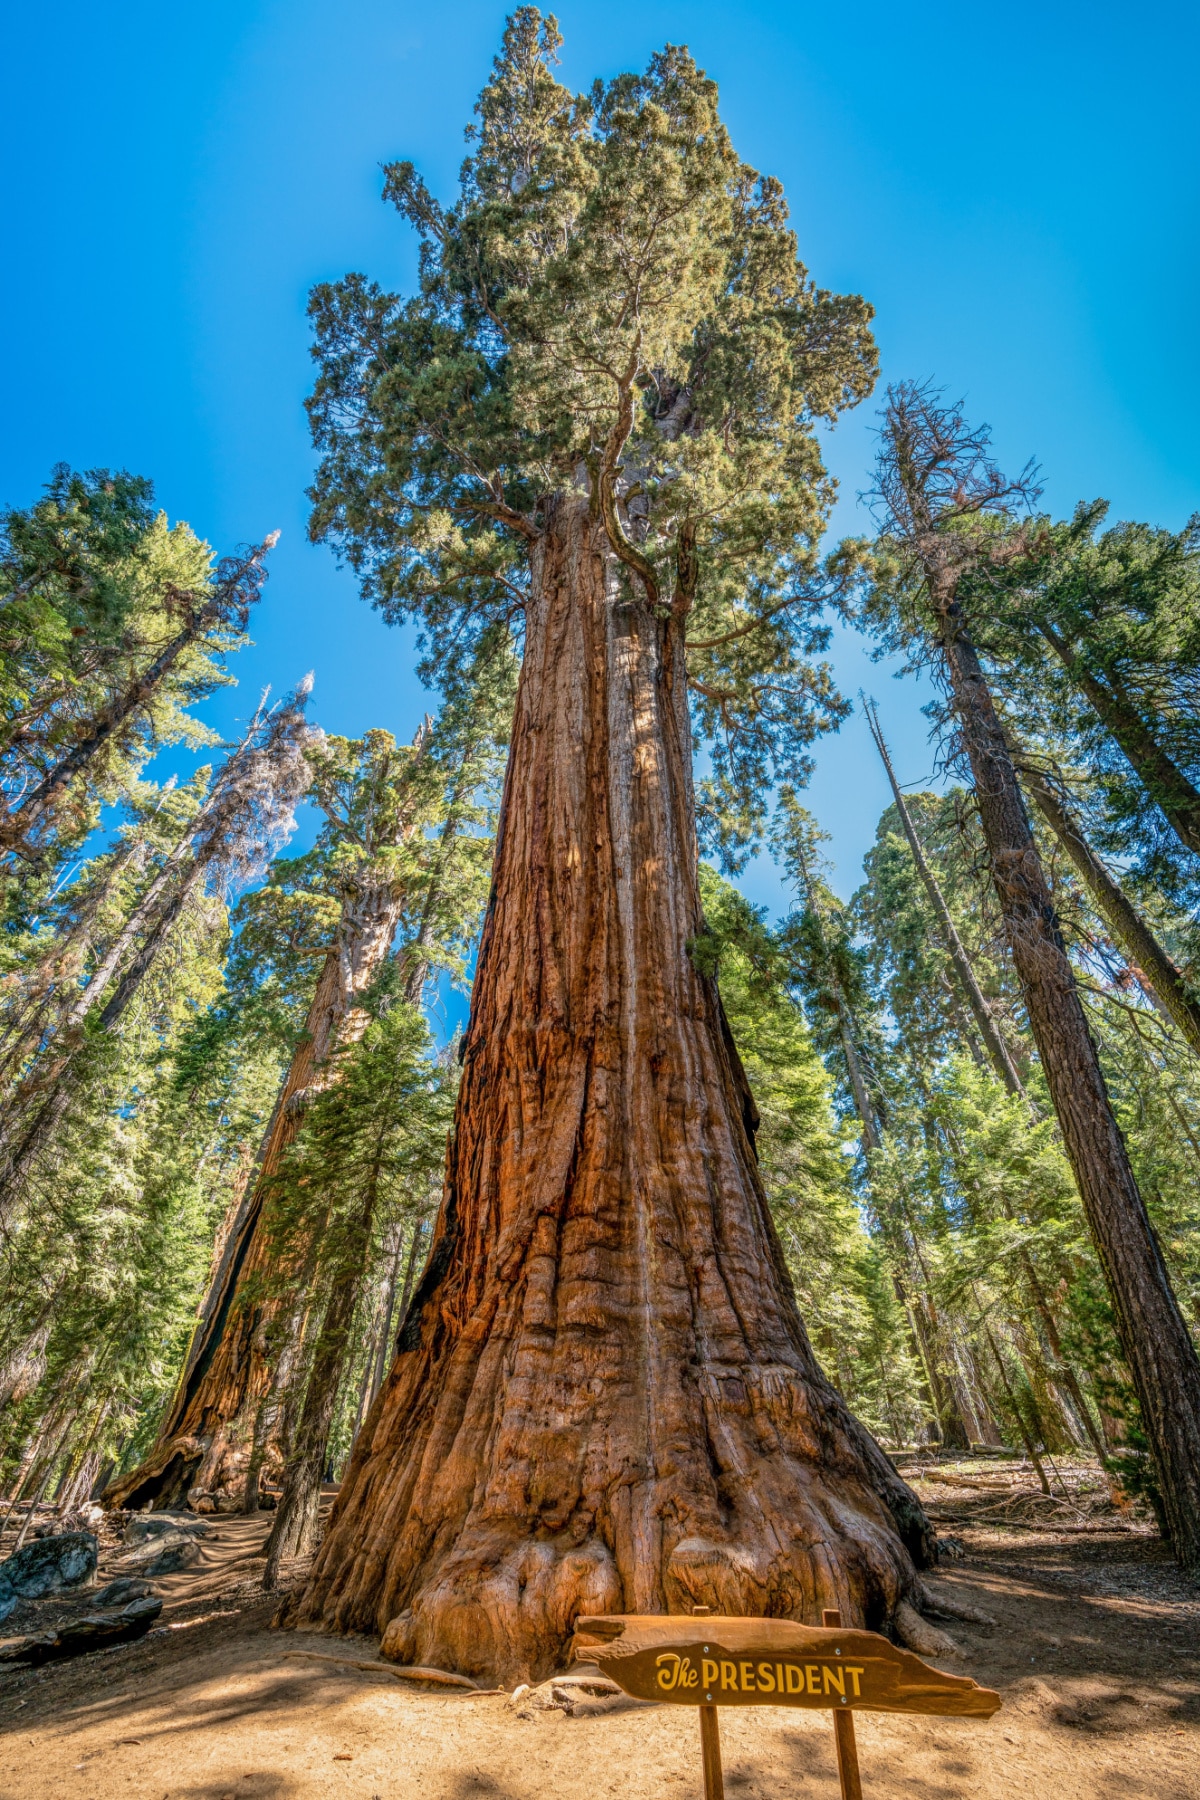 The President sequoia tree seen from base to top, which spans 241 feet.